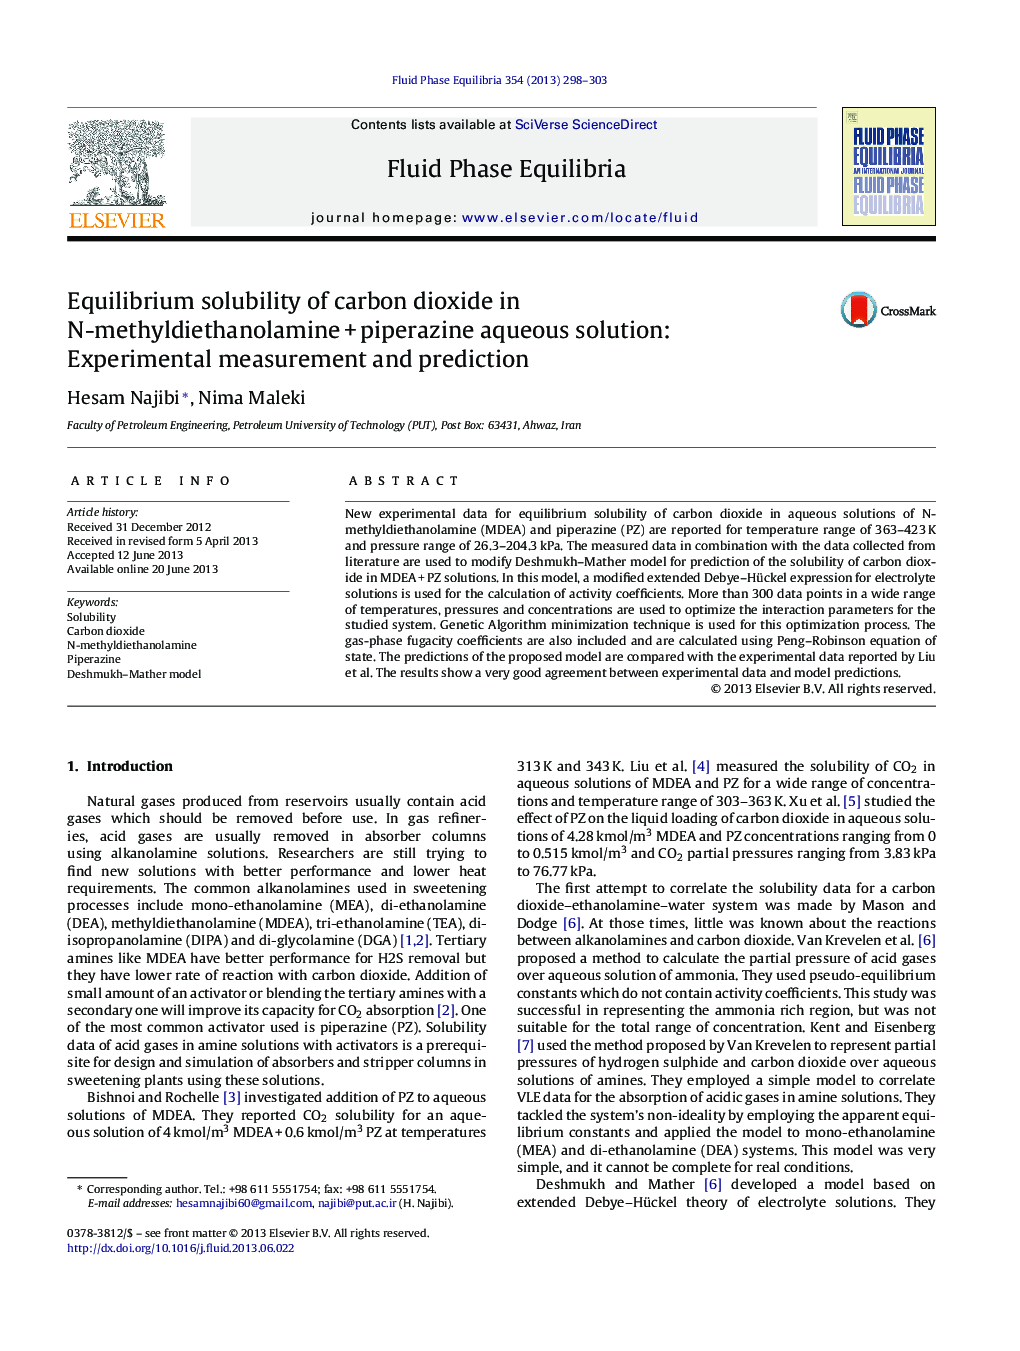 Equilibrium solubility of carbon dioxide in N-methyldiethanolamine + piperazine aqueous solution: Experimental measurement and prediction